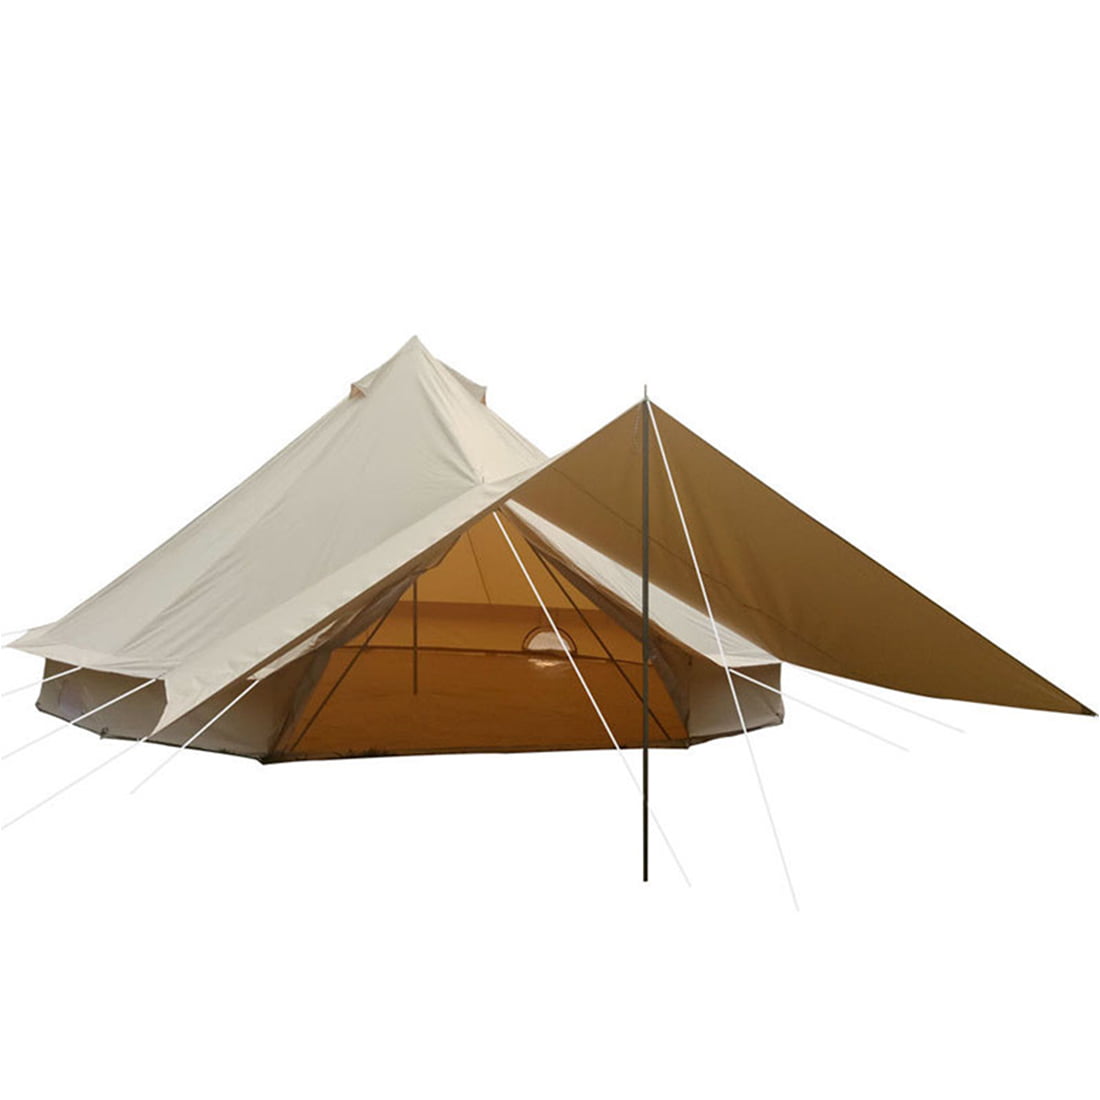 NOW ONLY £165.00 INC POSTAGE!! BELL TENT FIRE PIT TRIPOD